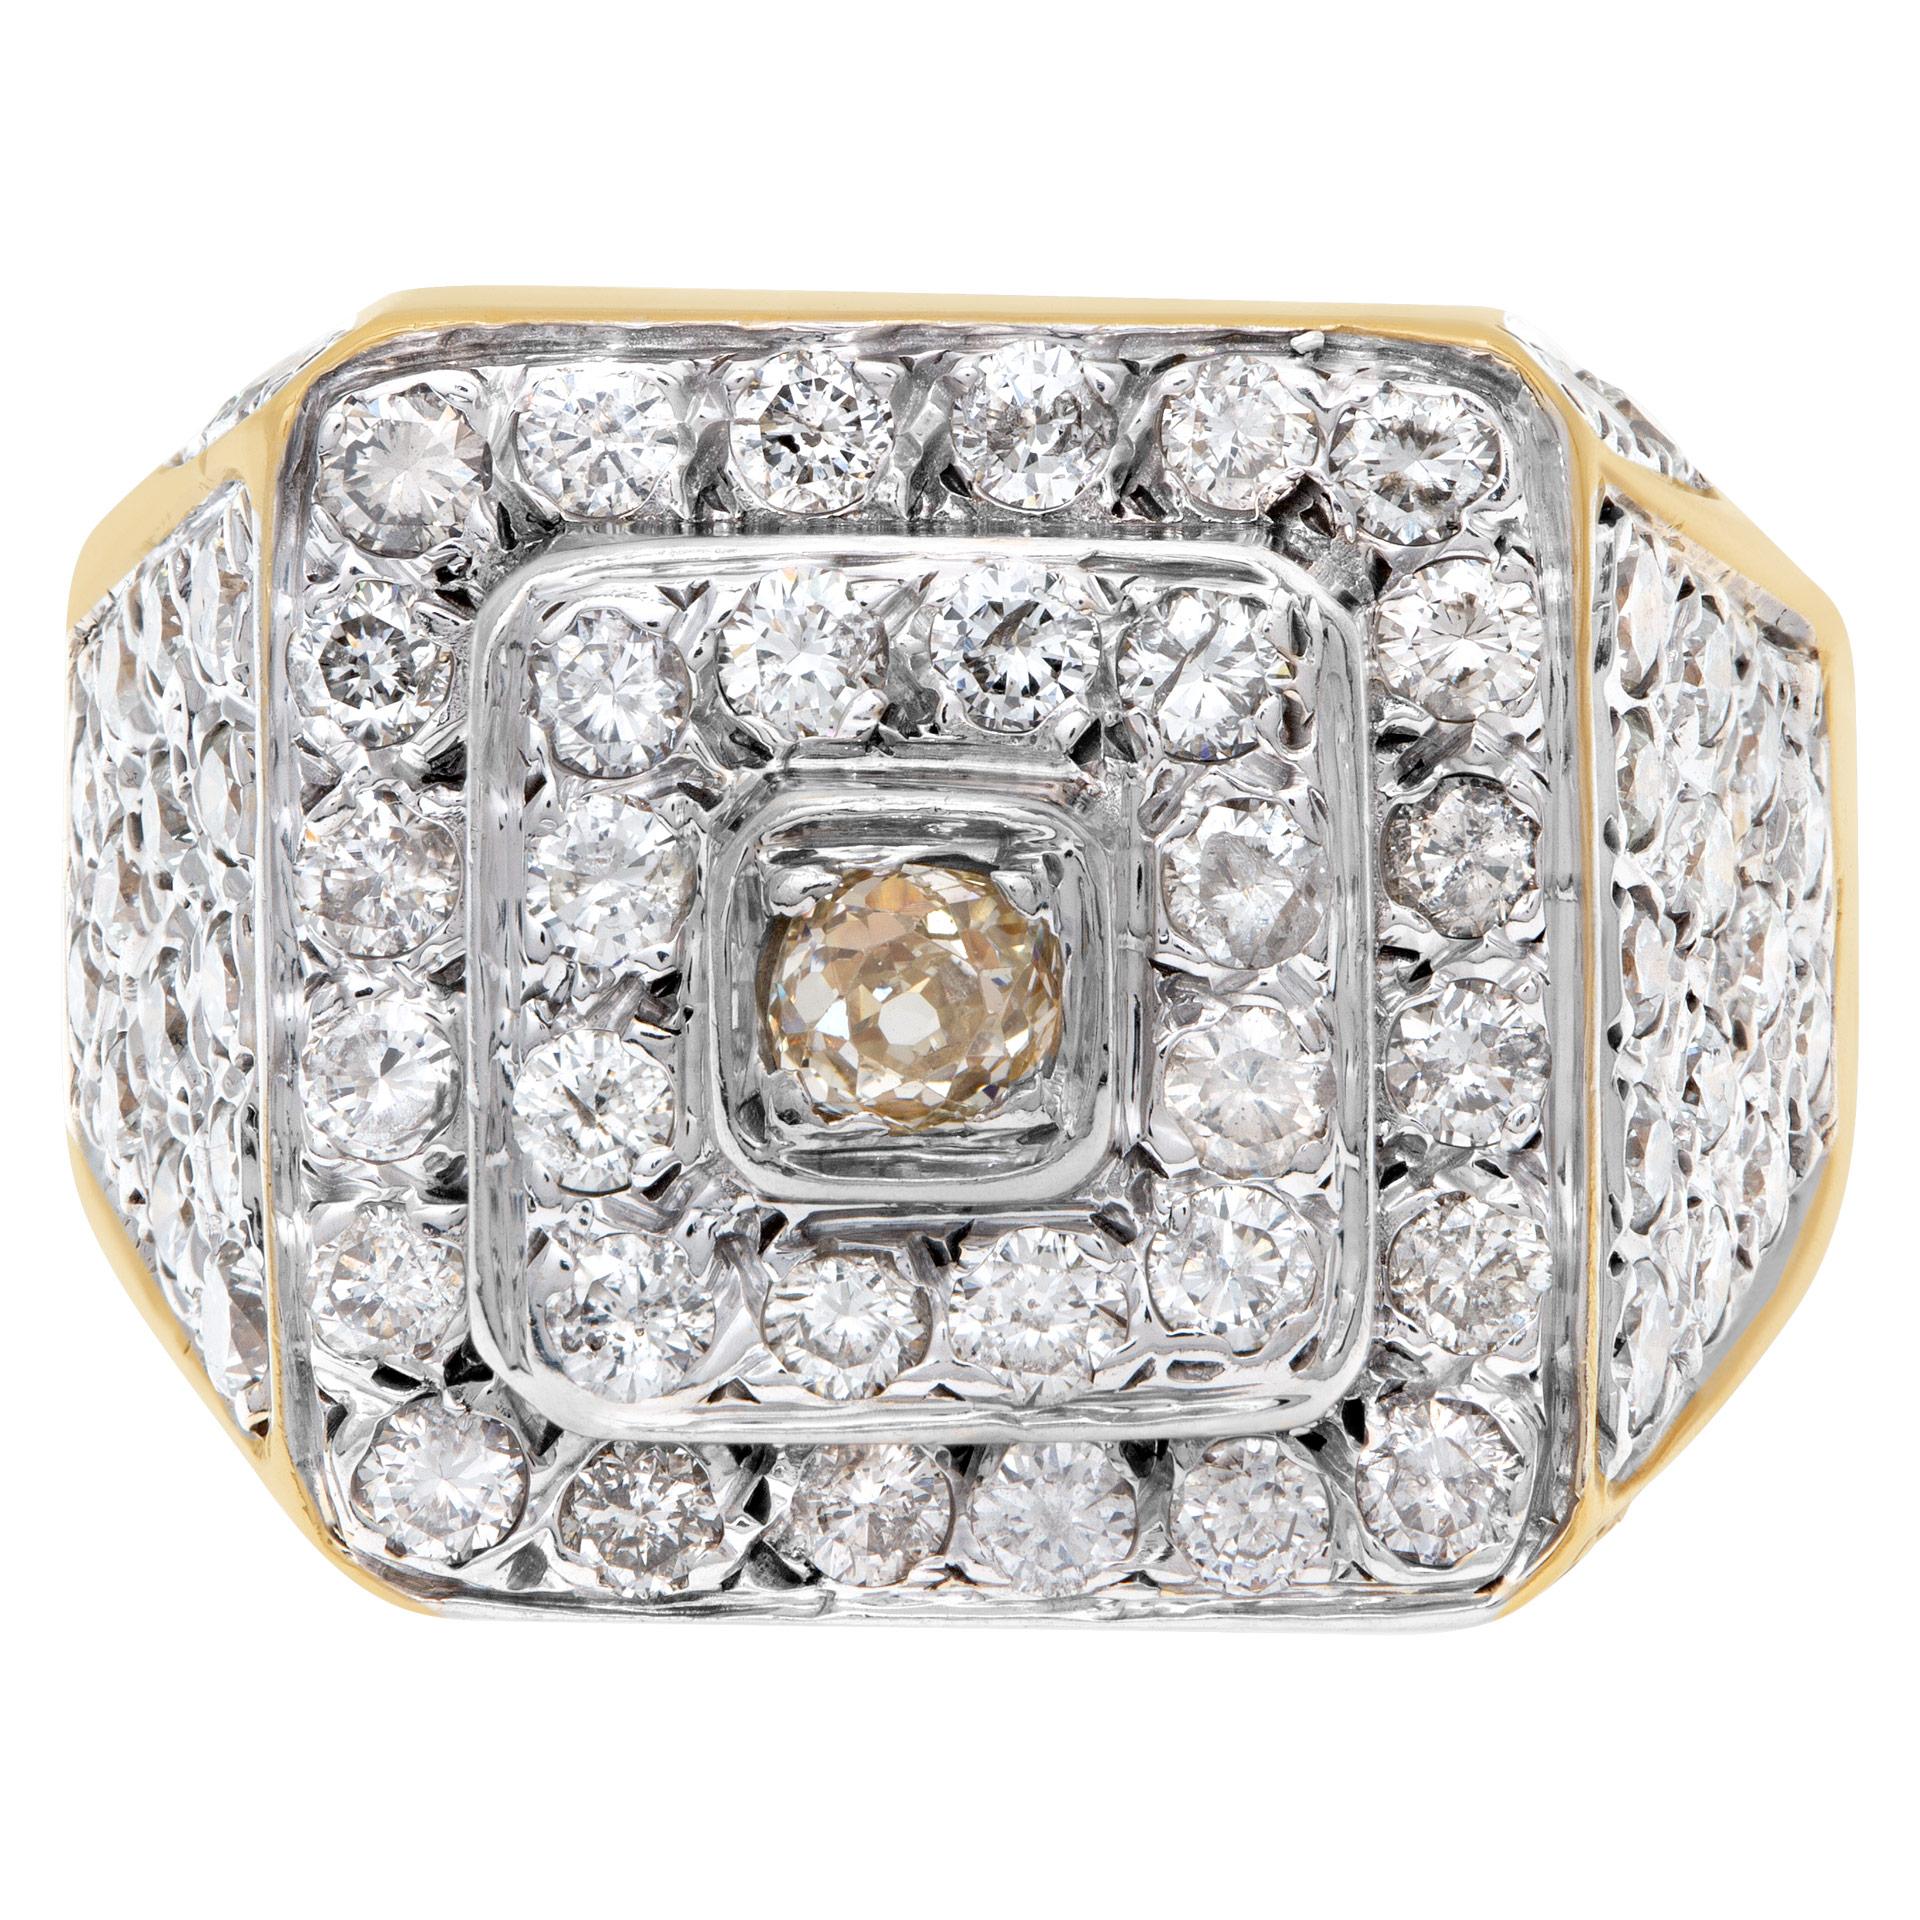 Bold diamond ring with approximately 2.90 carats in diamonds in 14k white and yellow gold. Size: 8.5.  This Diamond ring is currently size 8.5 and some items can be sized up or down, please ask! It weighs 10 pennyweights and is 14k.
